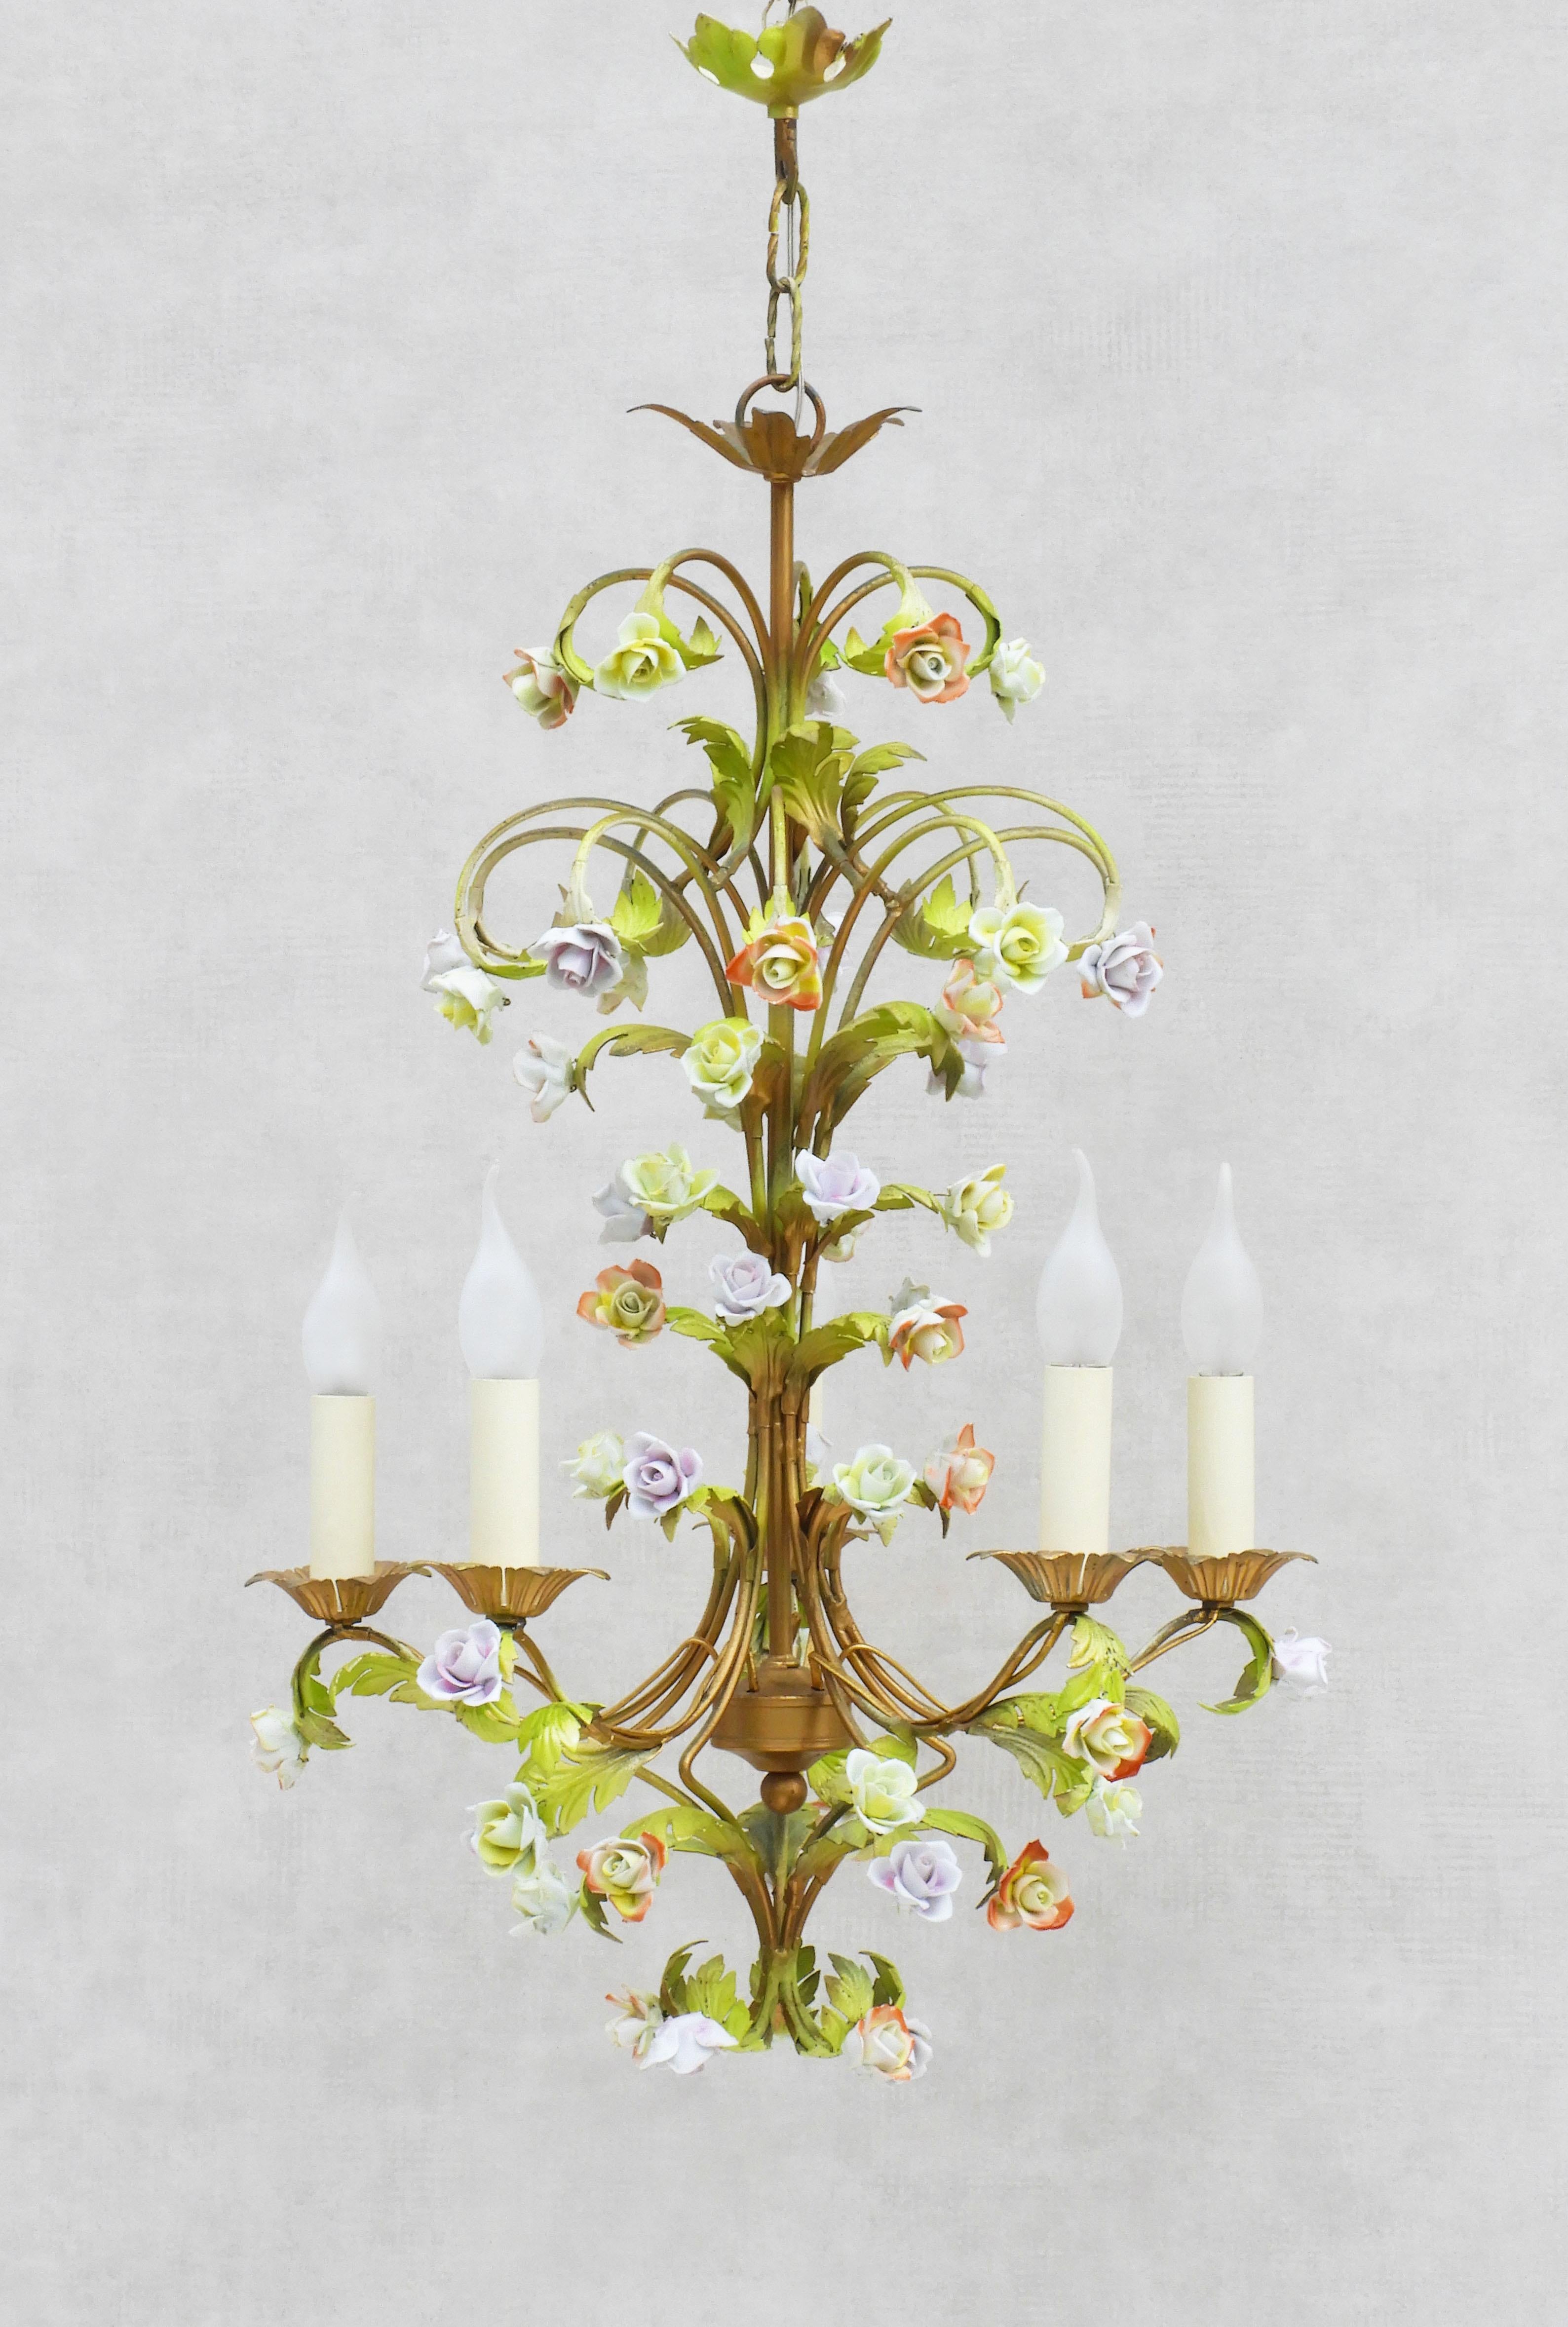 Hand-Crafted Midcentury Toleware Chandelier with Porcelaine Rose Pampilles circa 1950s France